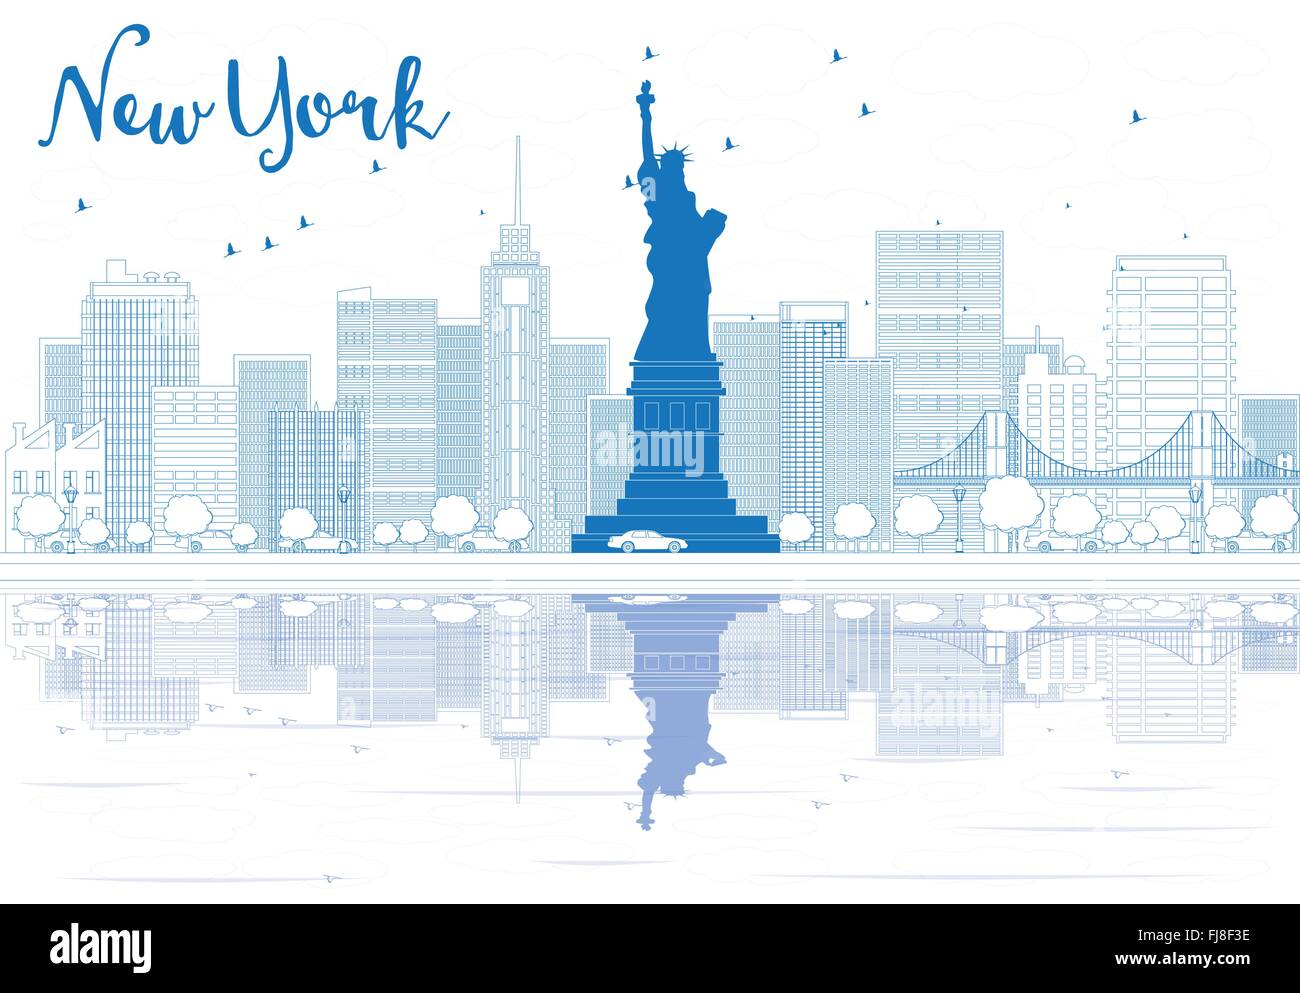 Outline New York city skyline with blue buildings. Vector illustration. Business travel and tourism concept with place for text. Stock Vector